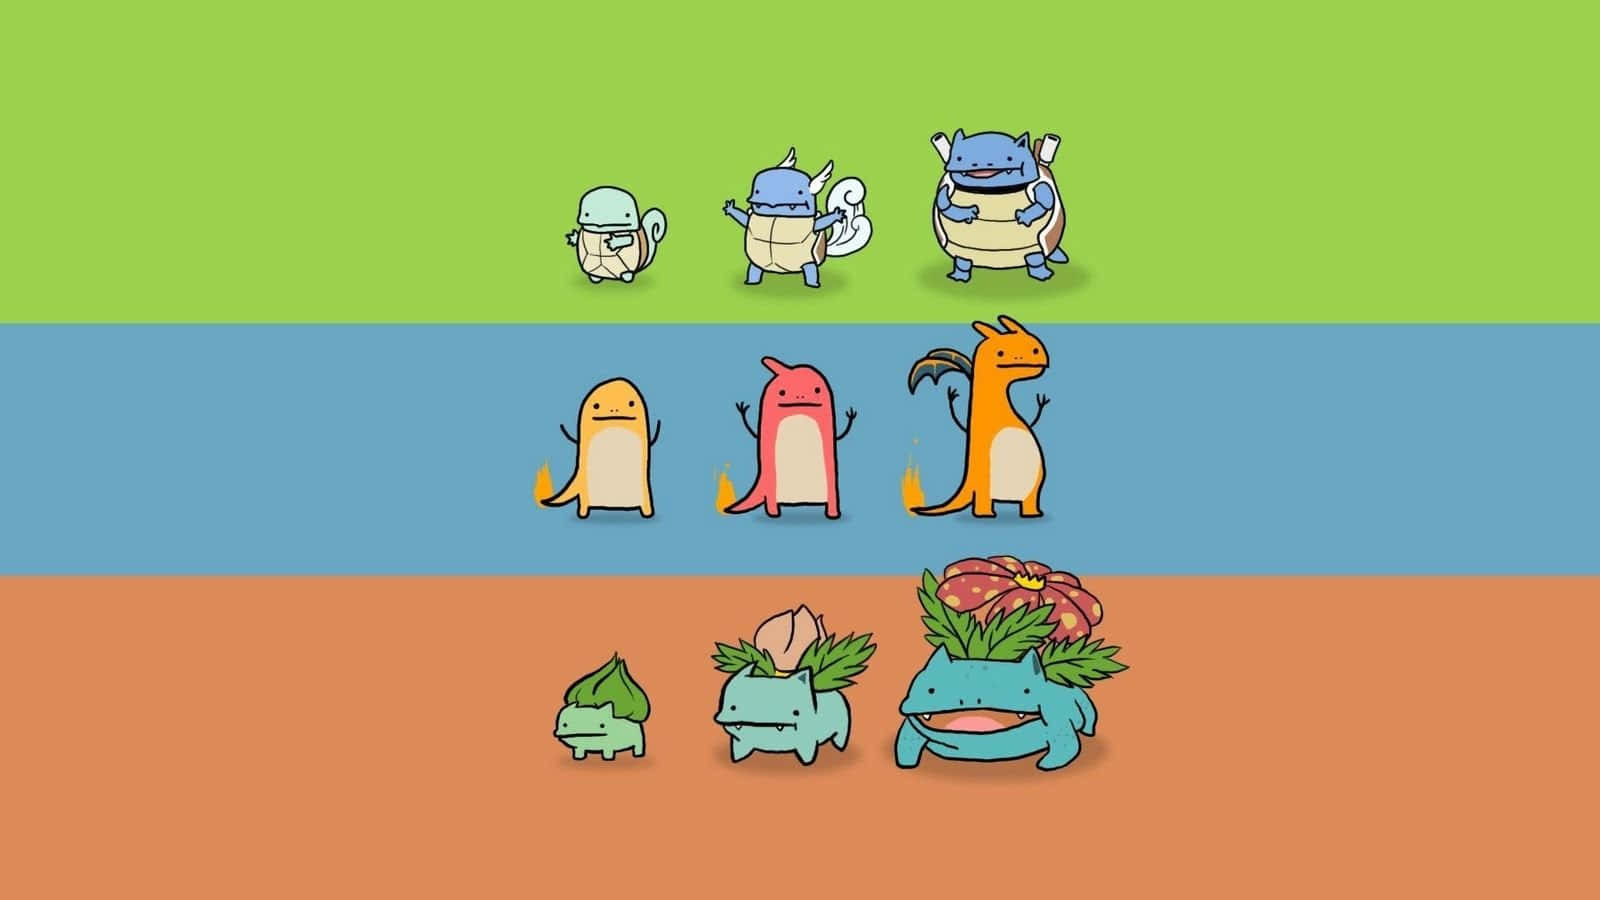 A tribute to classic Pokemon characters in Minimalist style Wallpaper